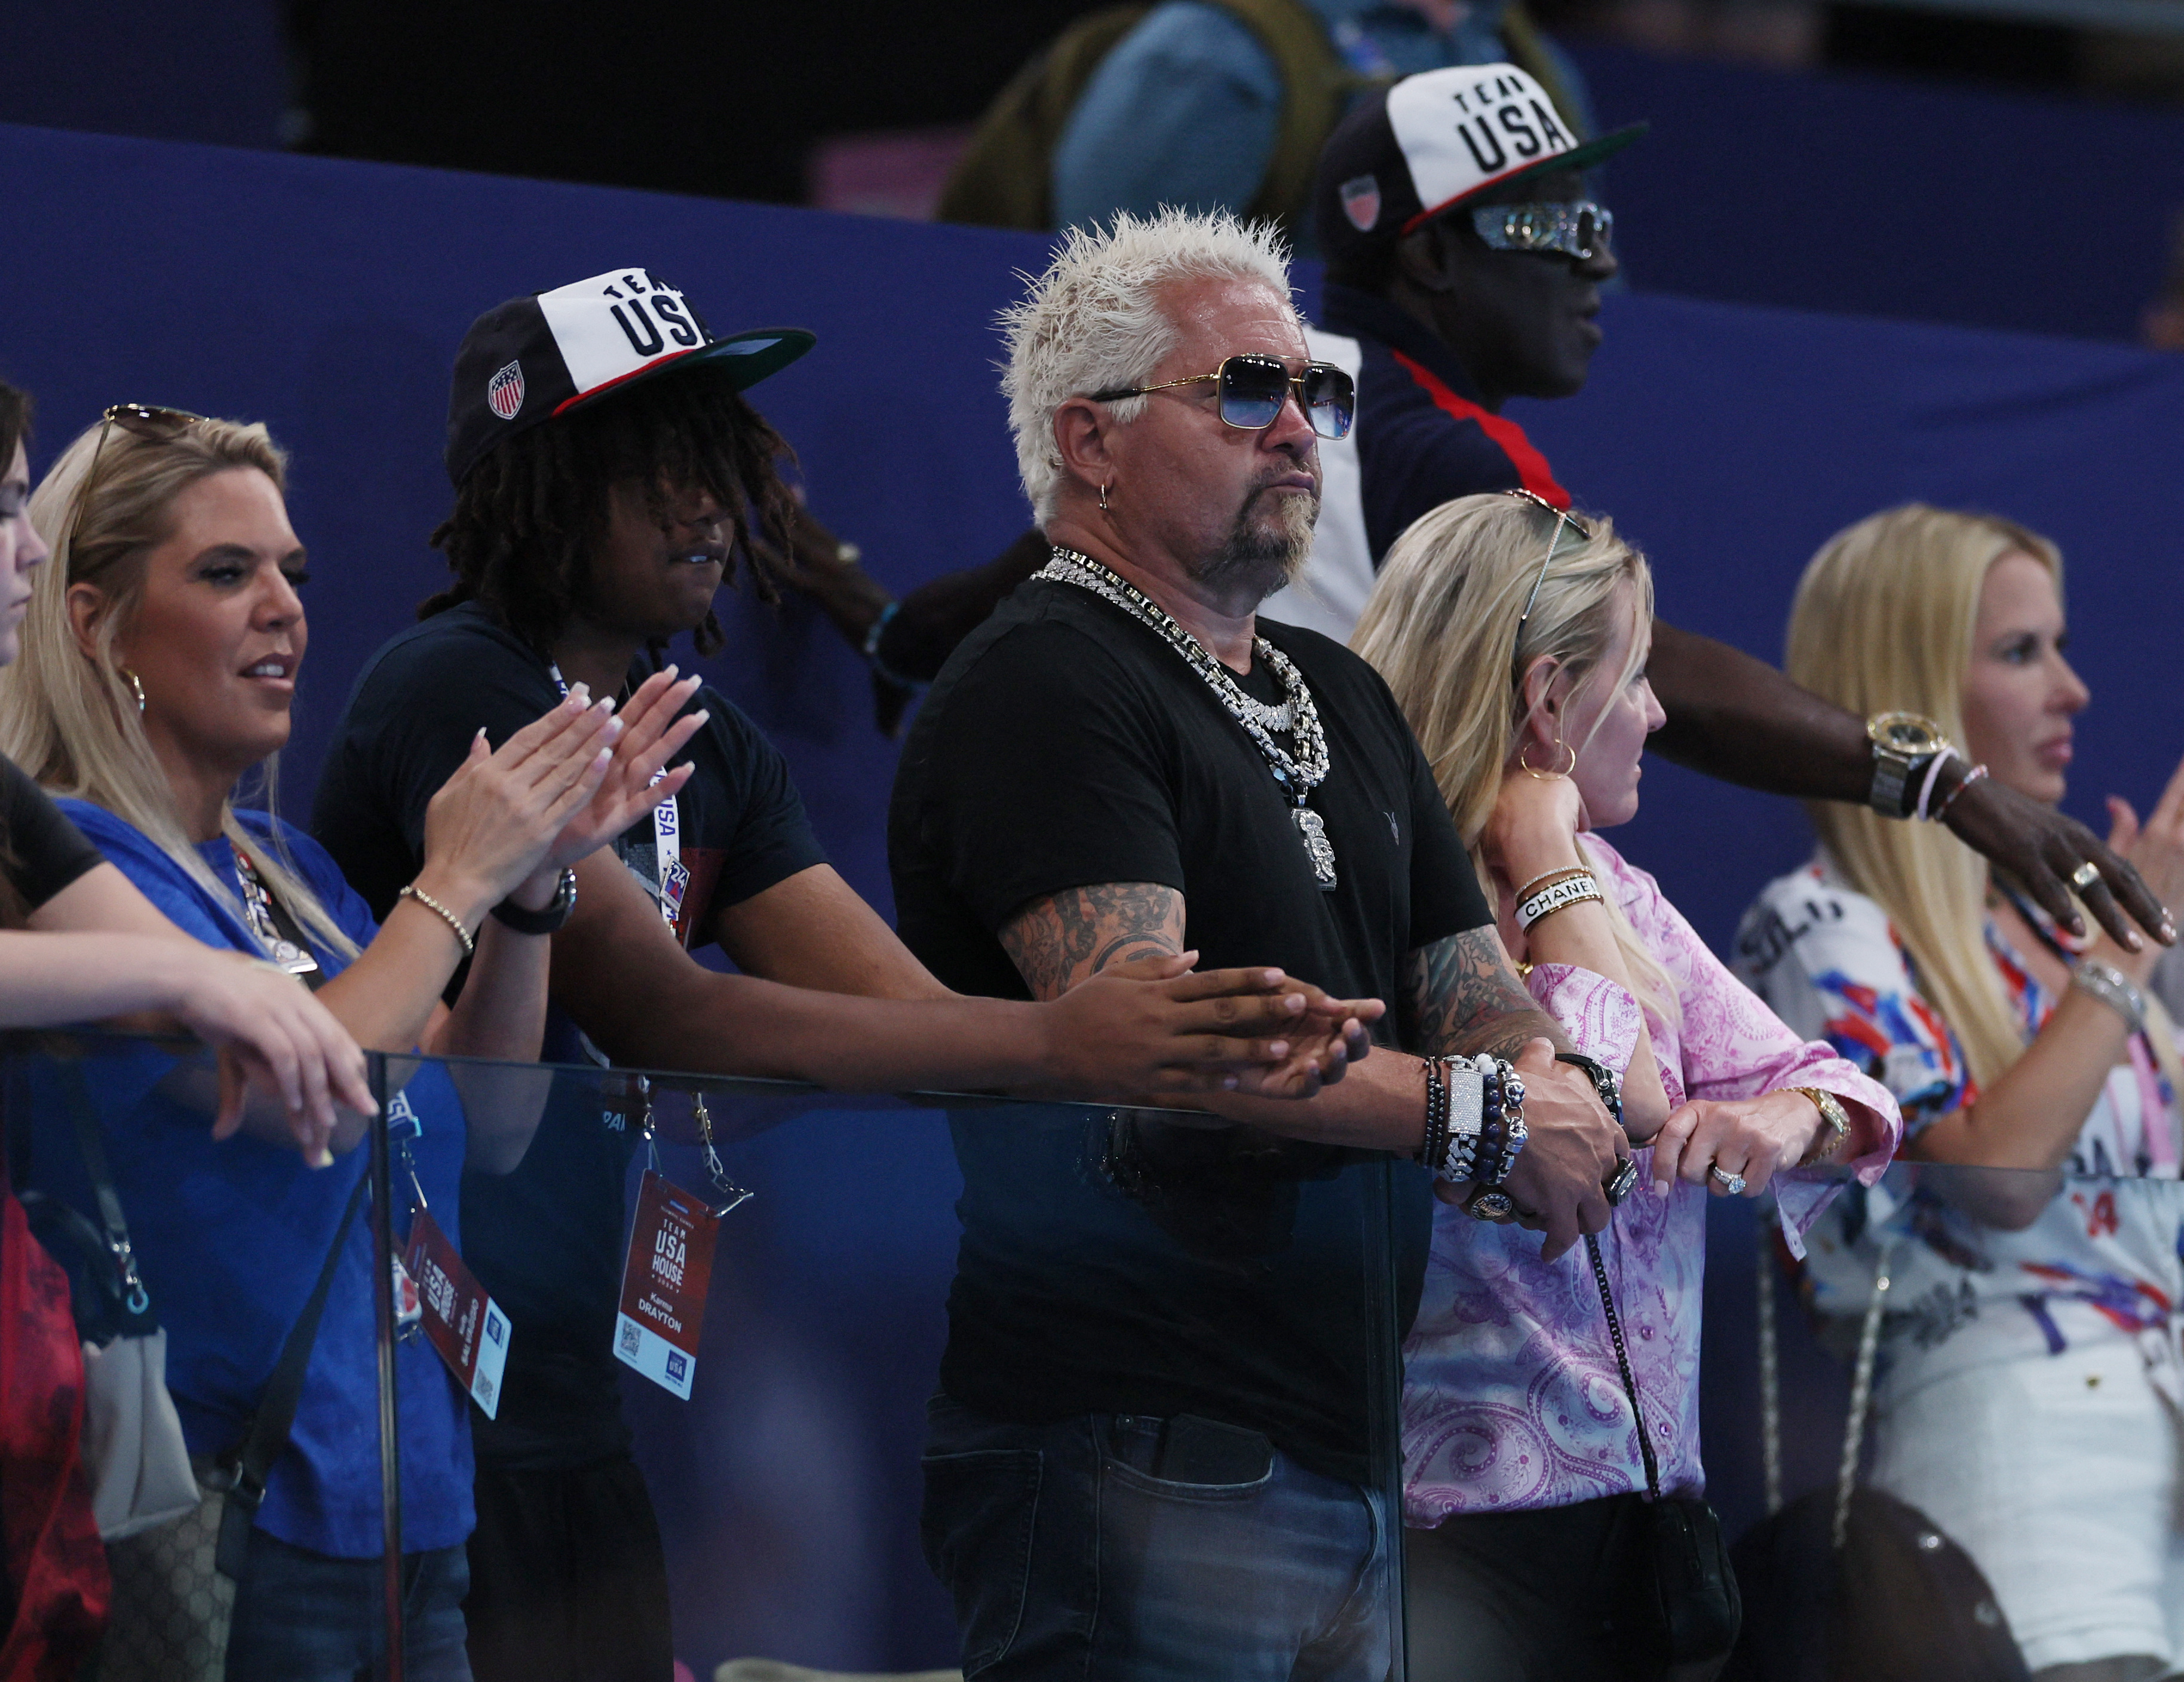 Flavor Flav and Guy Fieir cheering the U.S. team in their matchup against France at the 2024 Summer Olympics